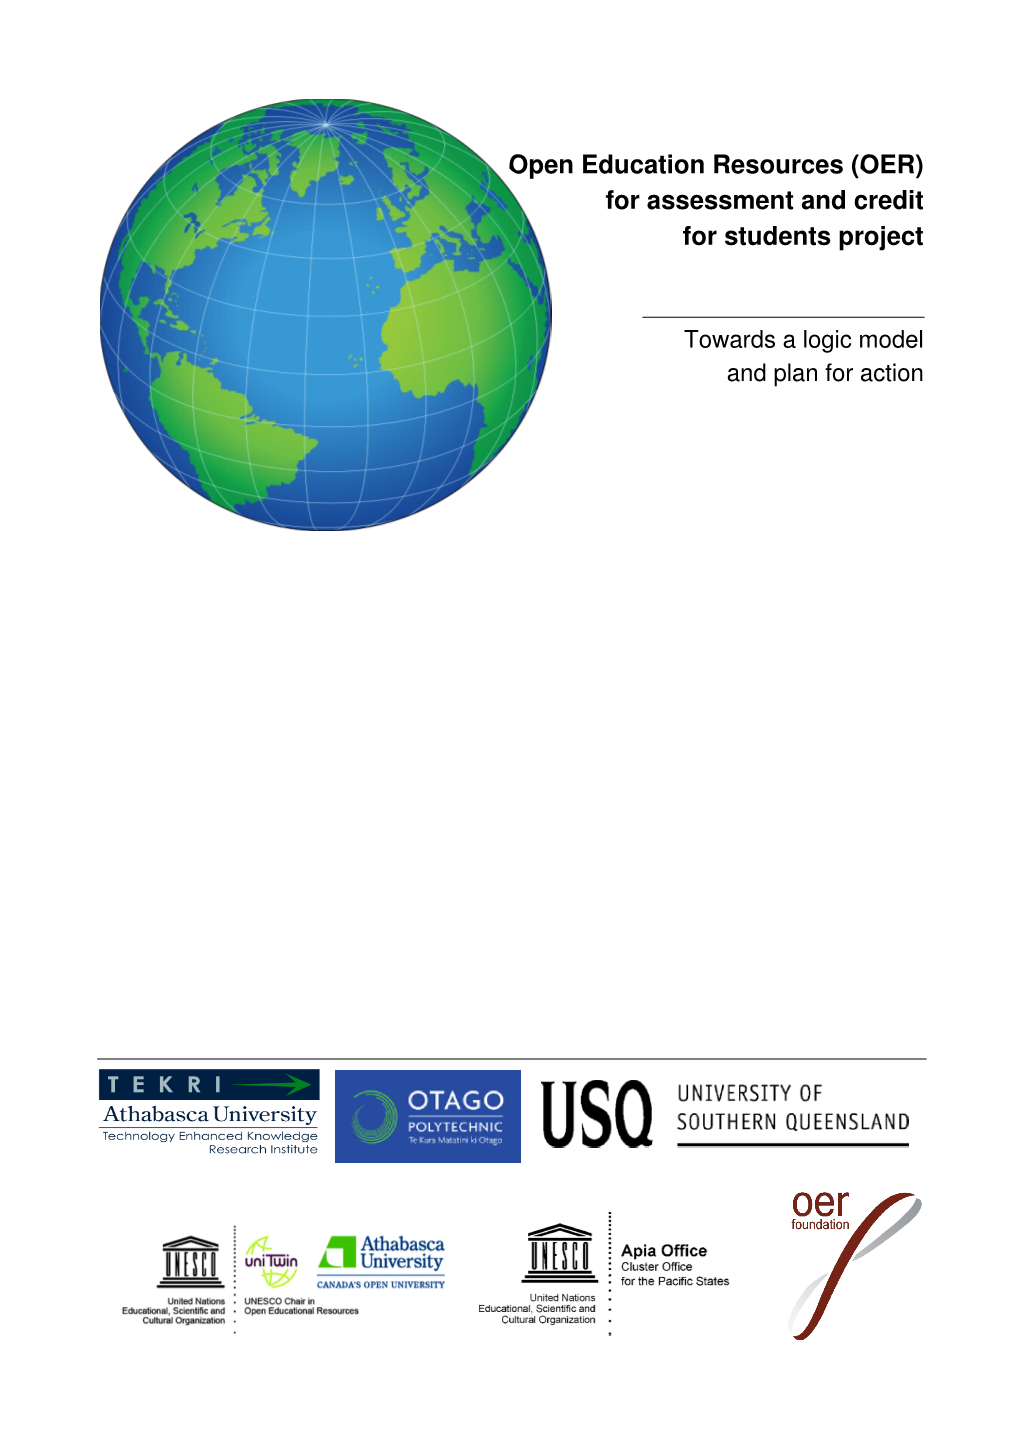 (OER) for Assessment and Credit for Students Project